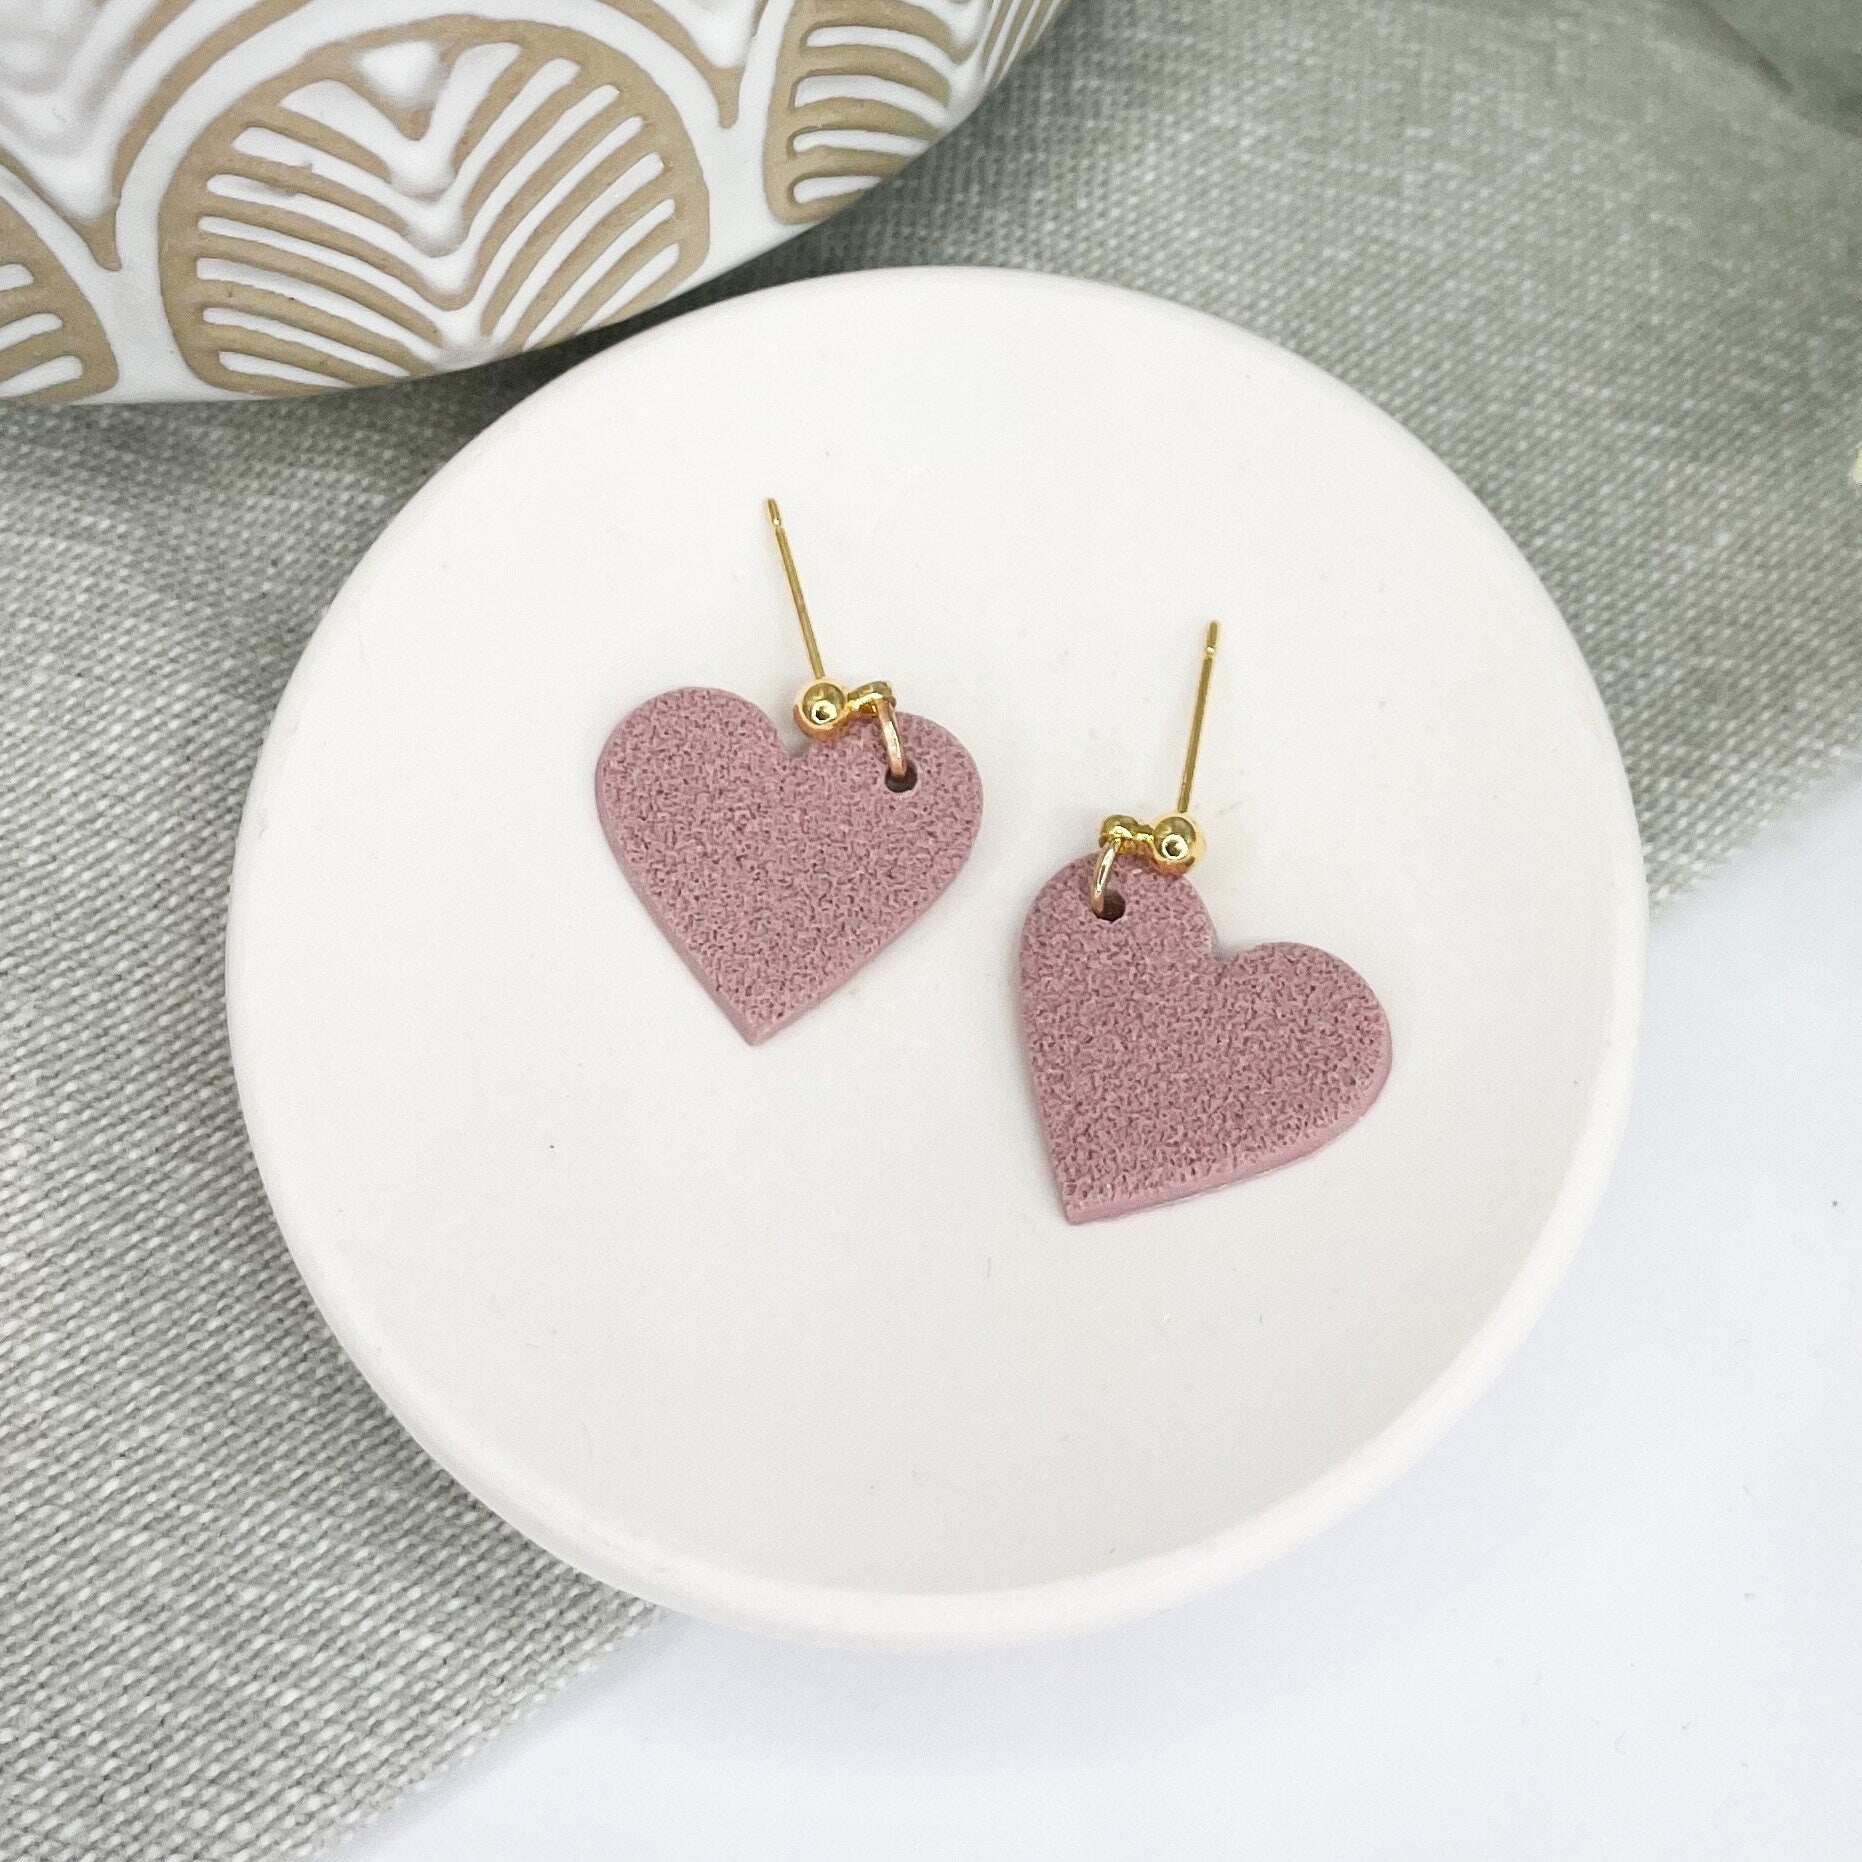 Polymer clay heart earrings, galentine gift, post box gift, best friend birthday gift, valentines girlfriend gift,